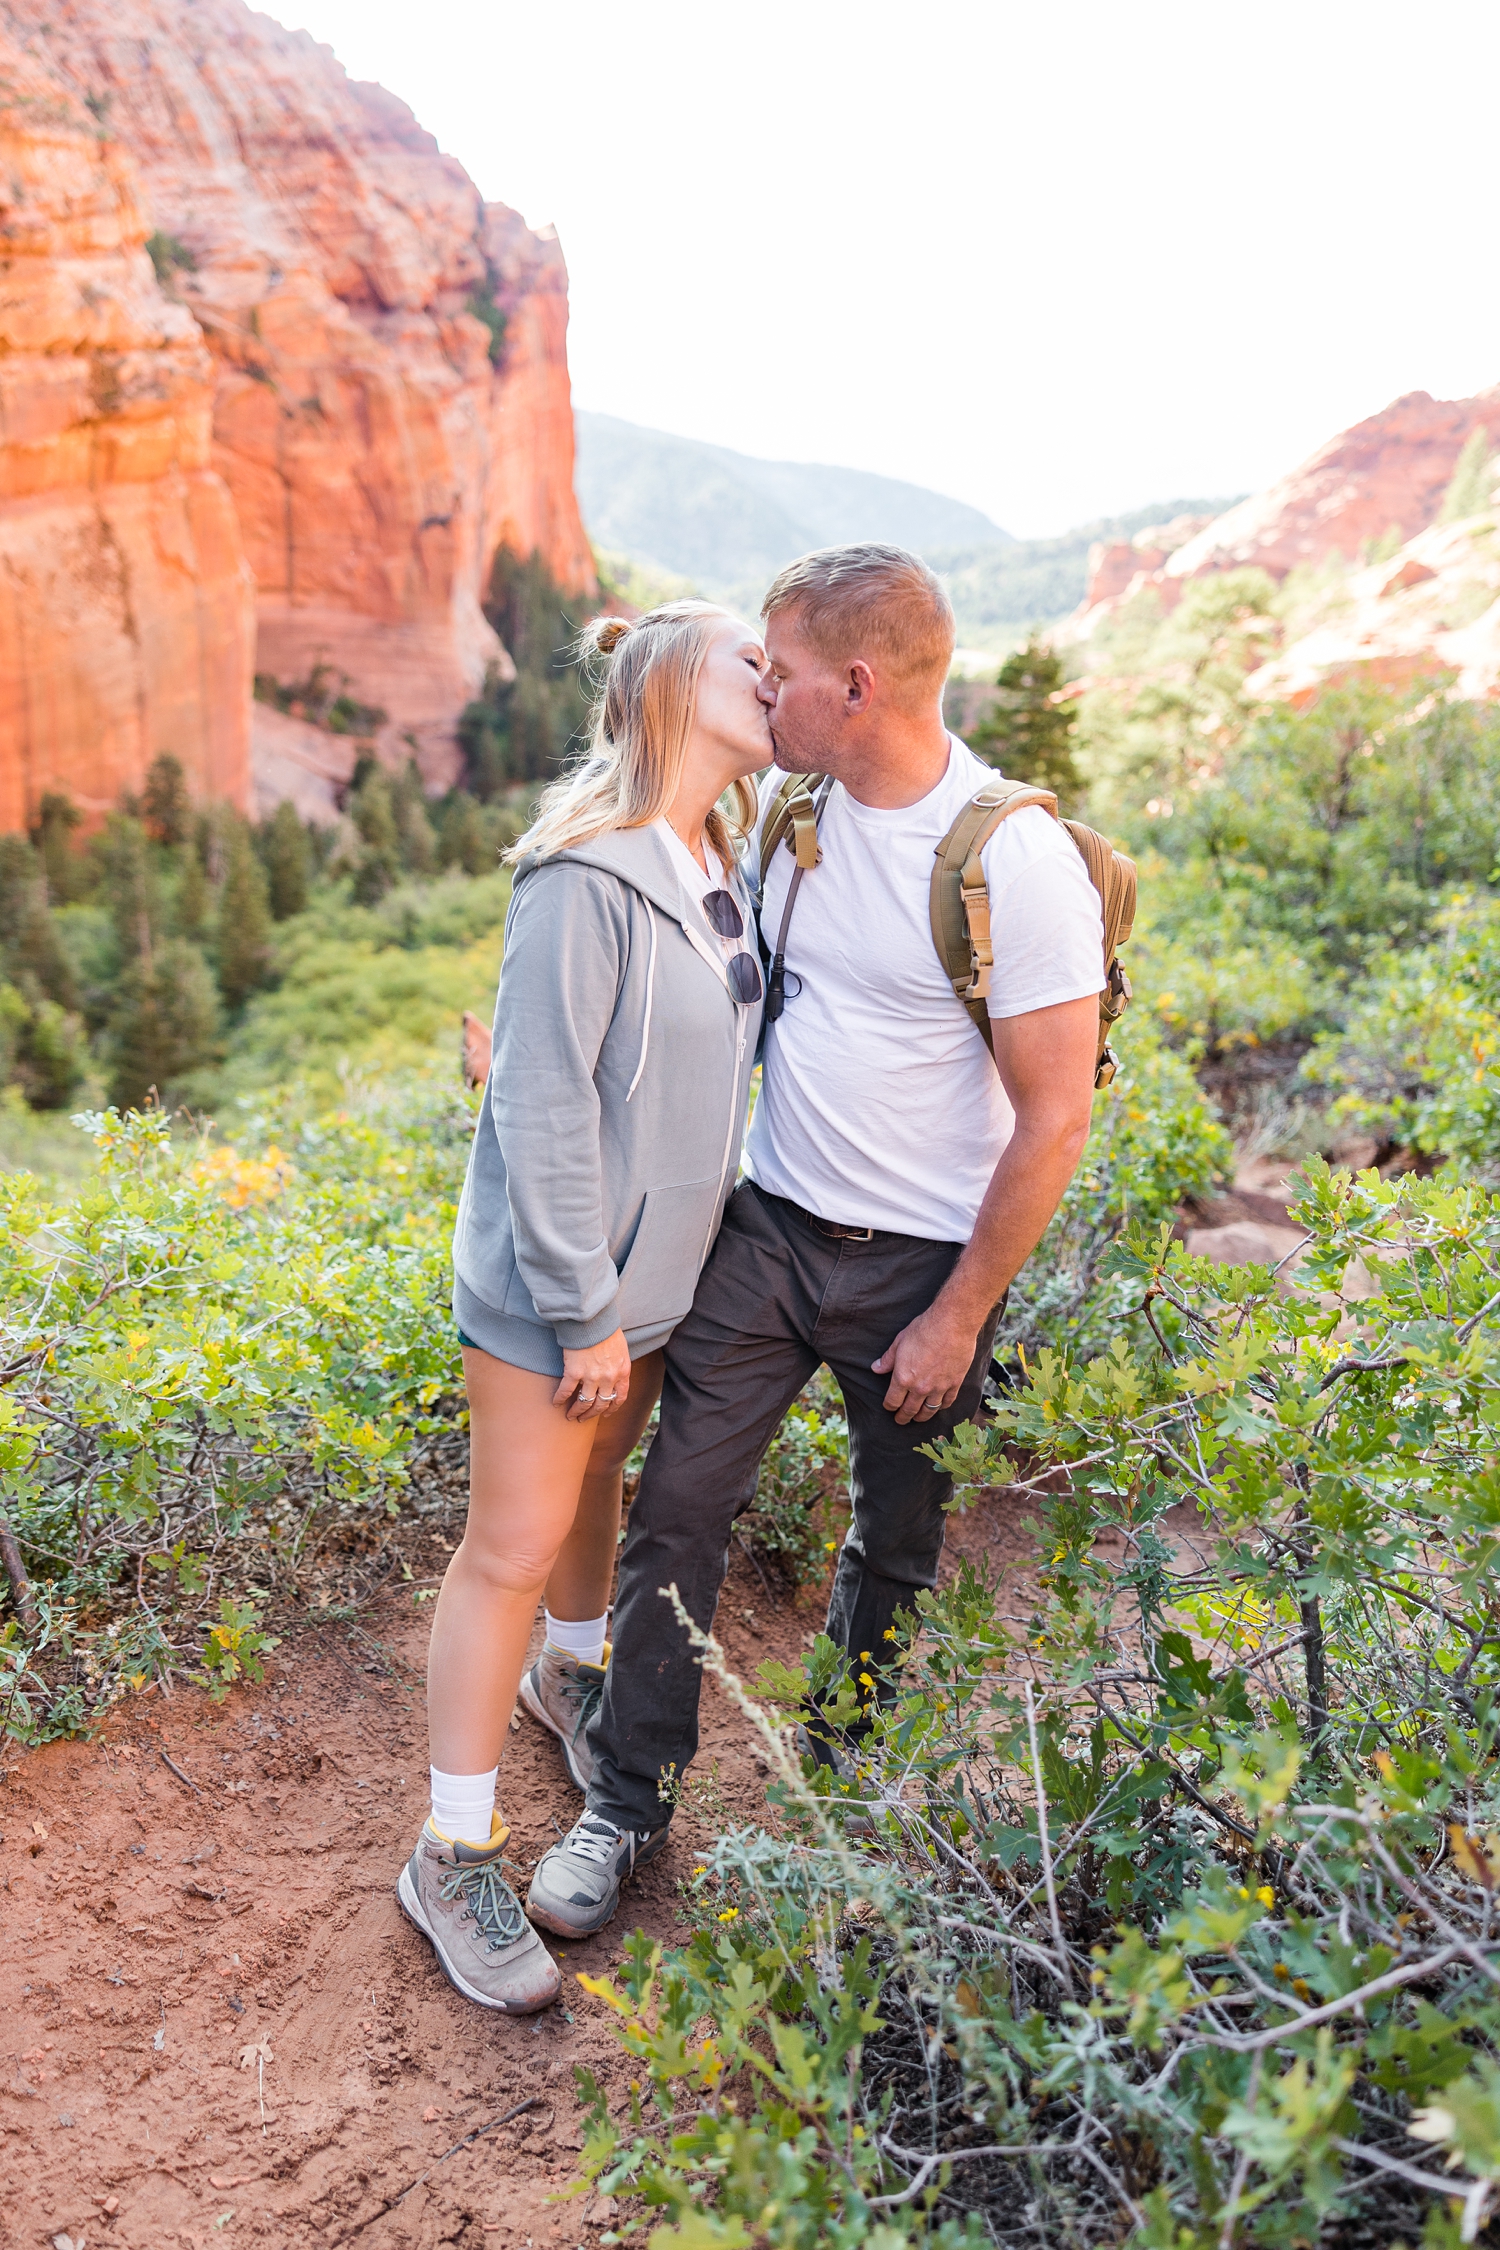 Joe and I kissing in a scenic valley on South Taylor Creek Trail in the Kolob Canyon in Zion National Park | CB Studio